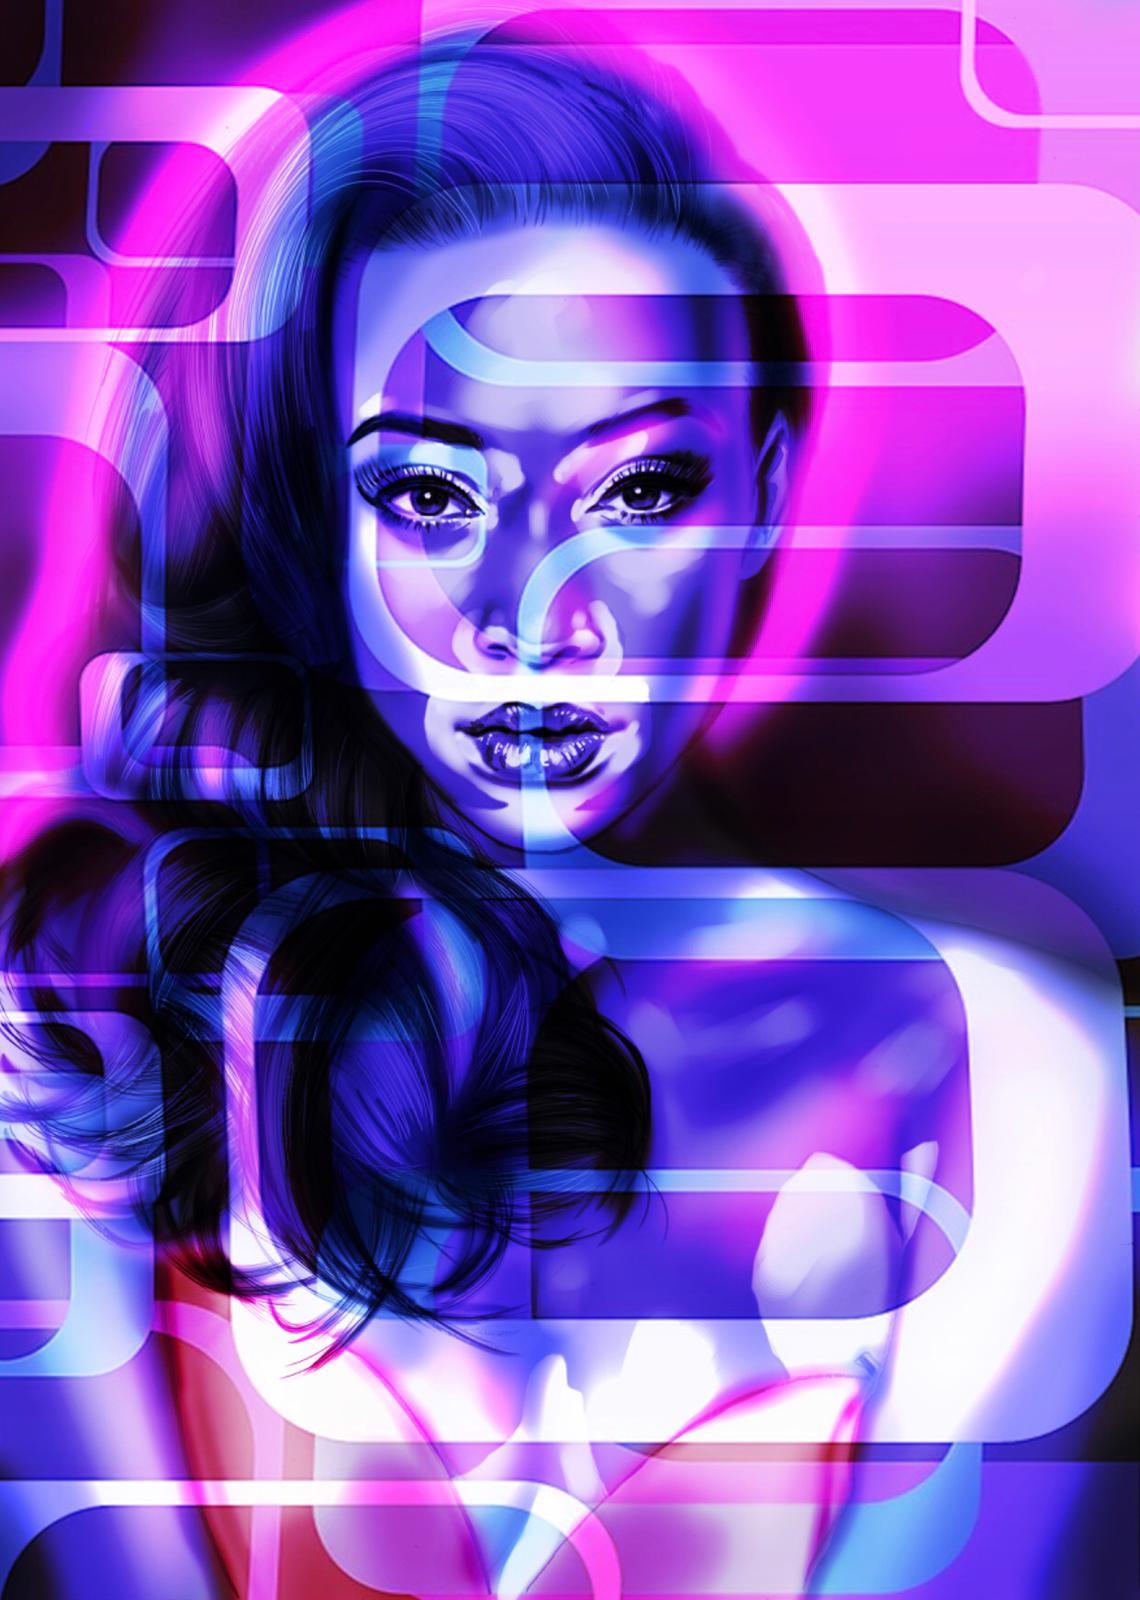 Winnie Harlow limited edition print of 10 art high profile personally signed  - Art by Metin Salih